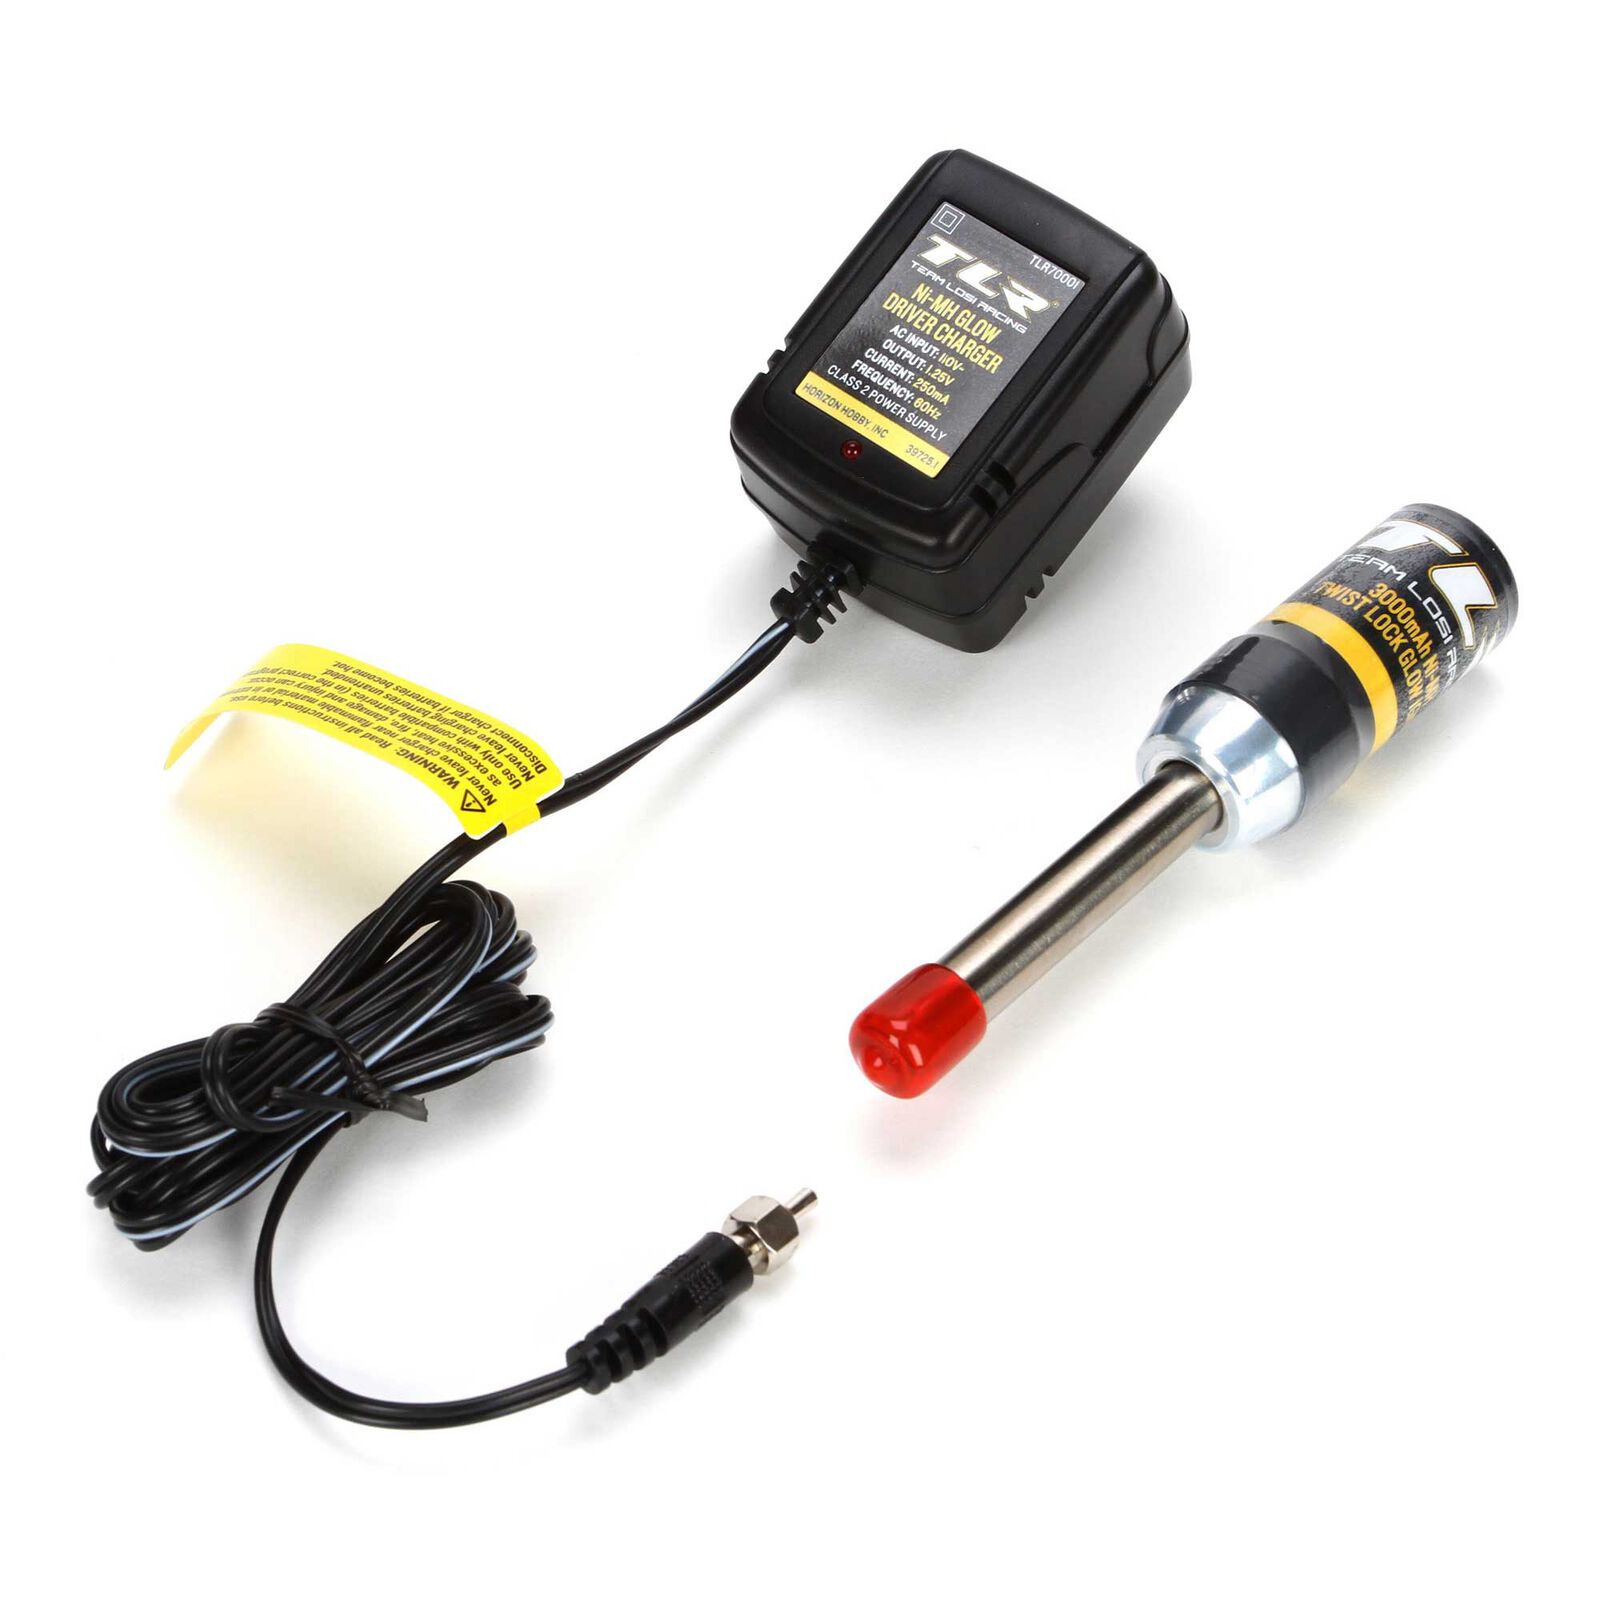 Twist Lock Glow Igniter and Charger Combo